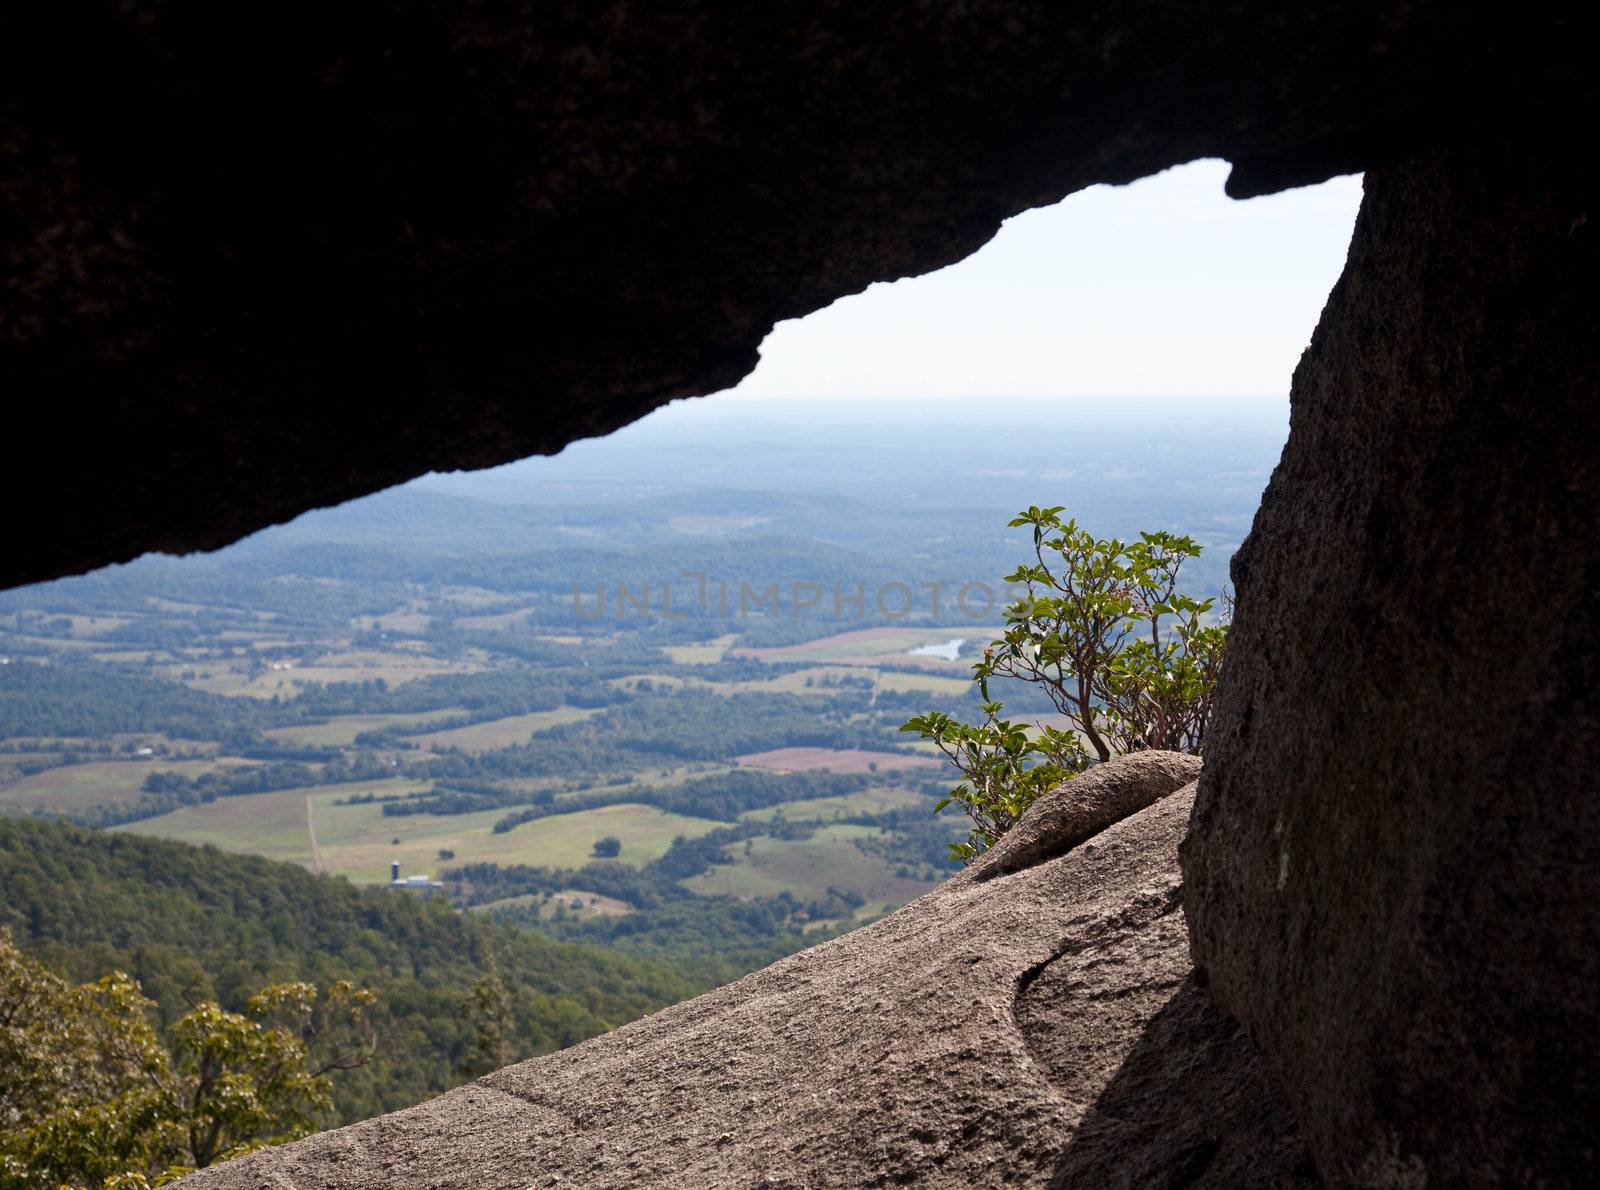 Shenandoah valley through rock tunnel by steheap